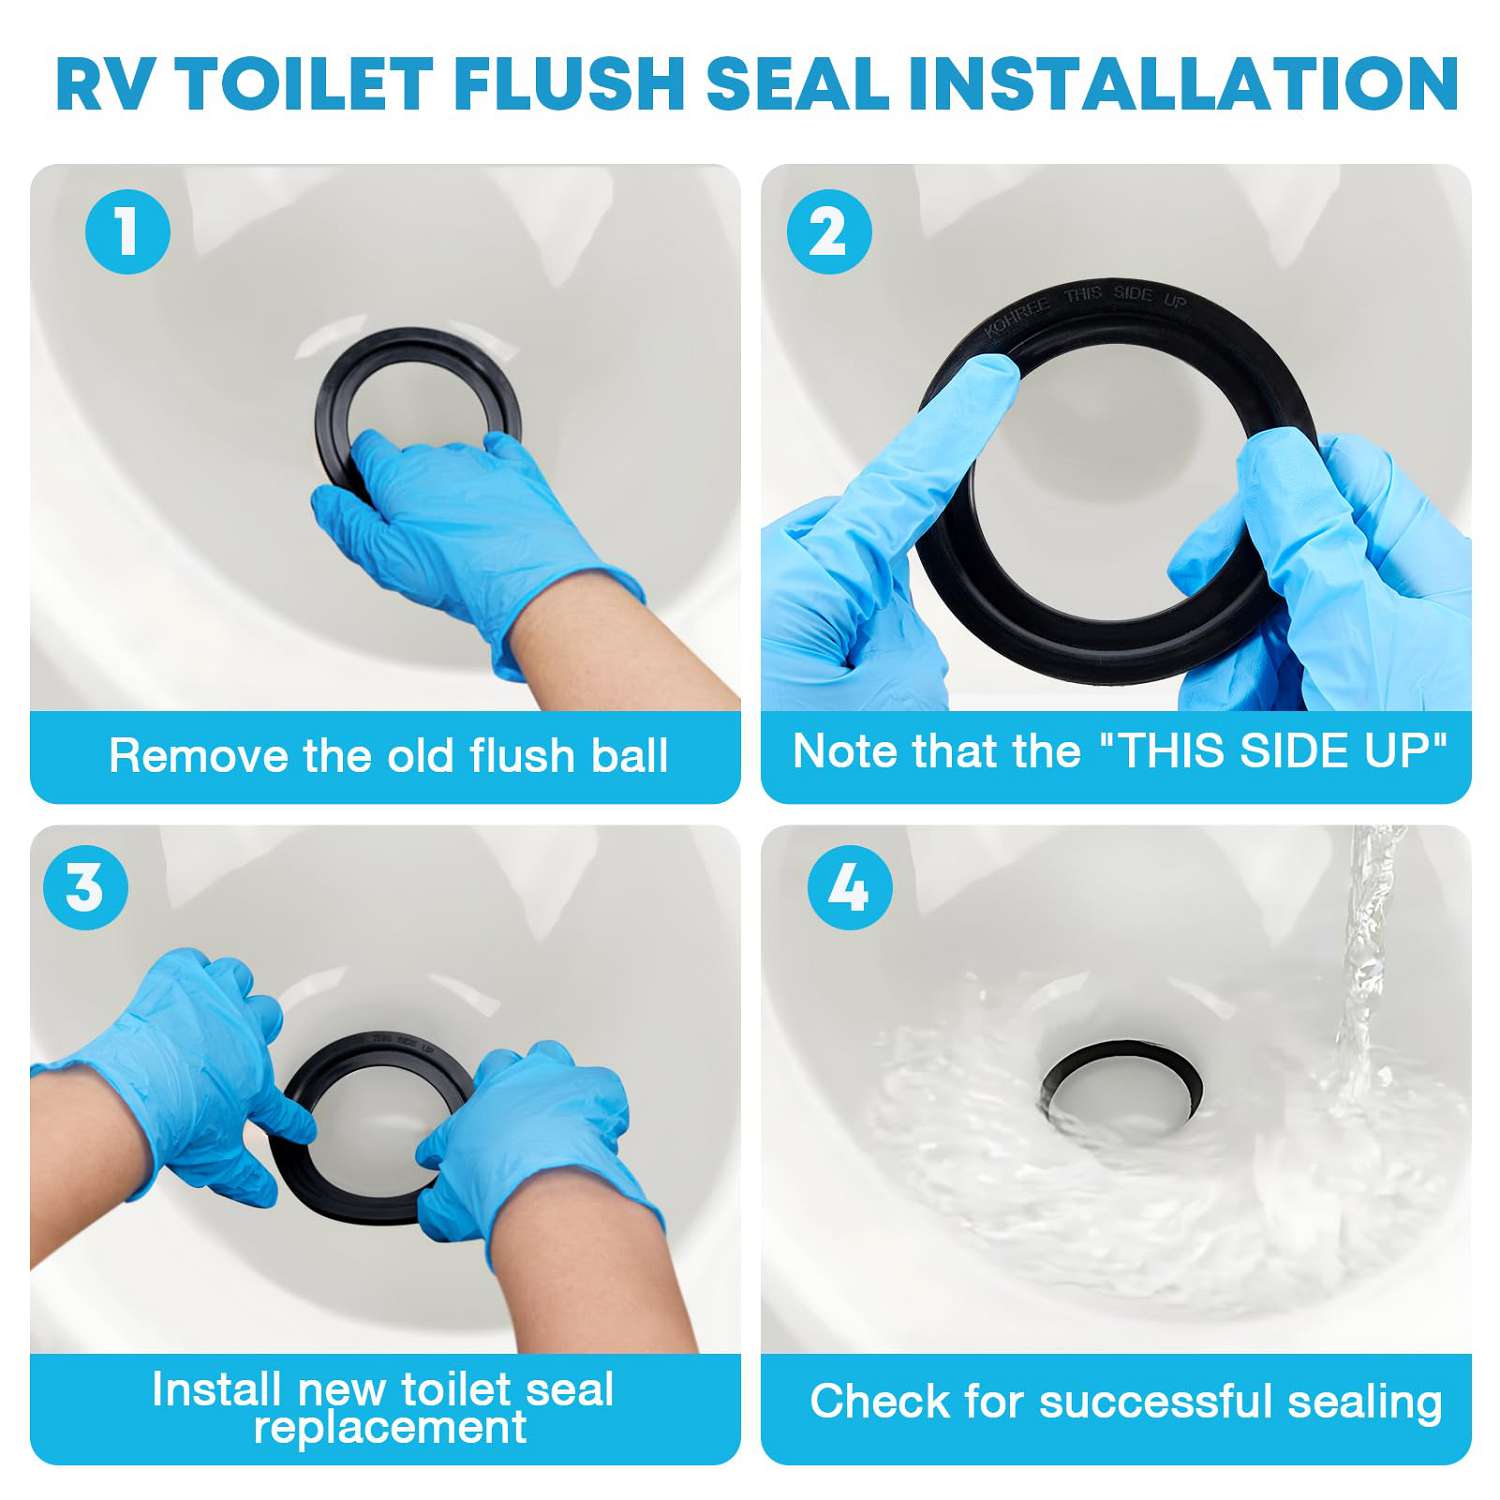 RV toilet replacement